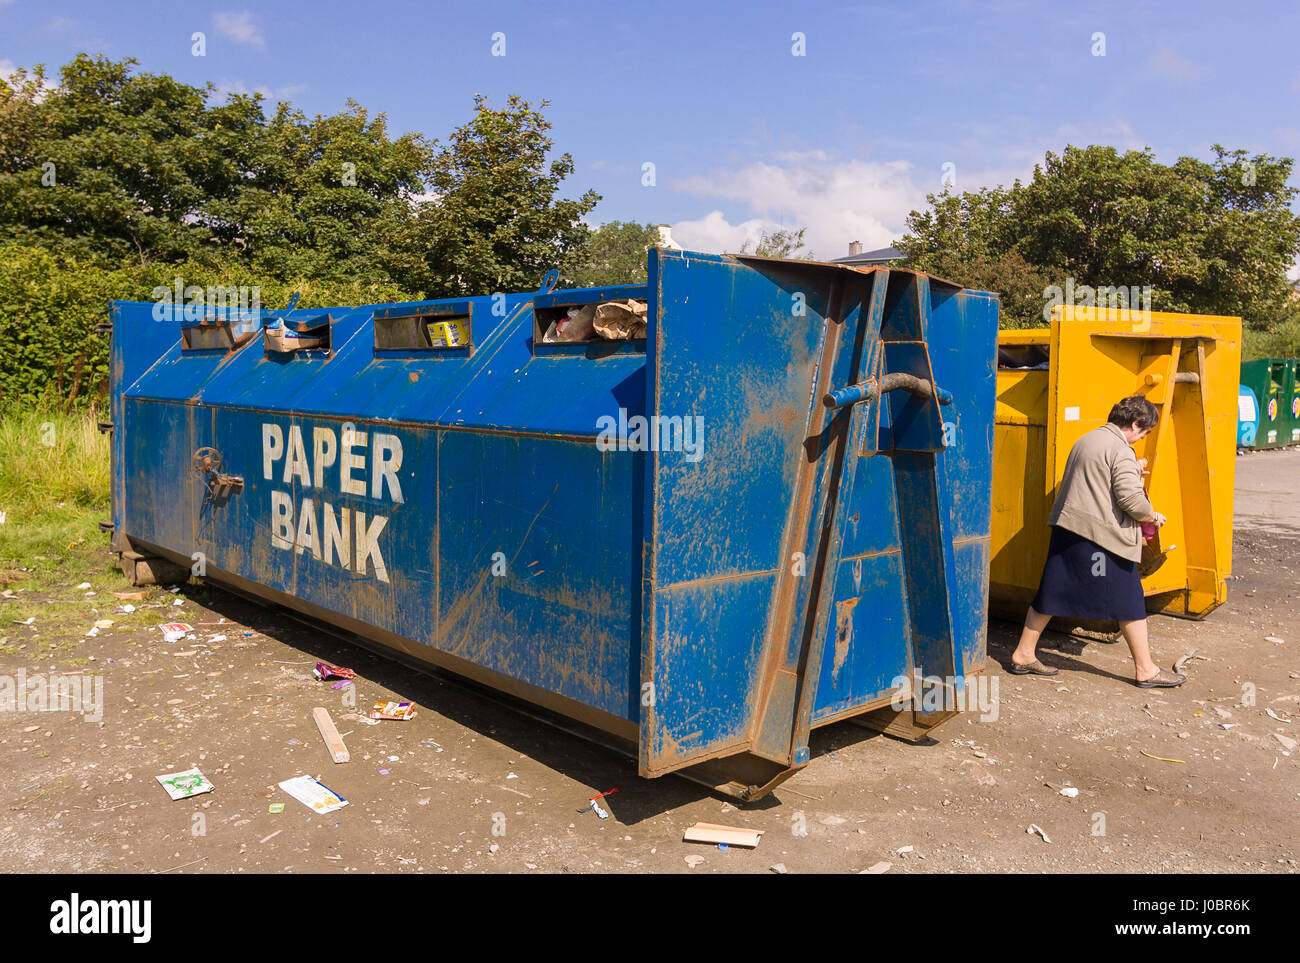 DONEGAL, Irland - Recycling-Behälter. Stockfoto